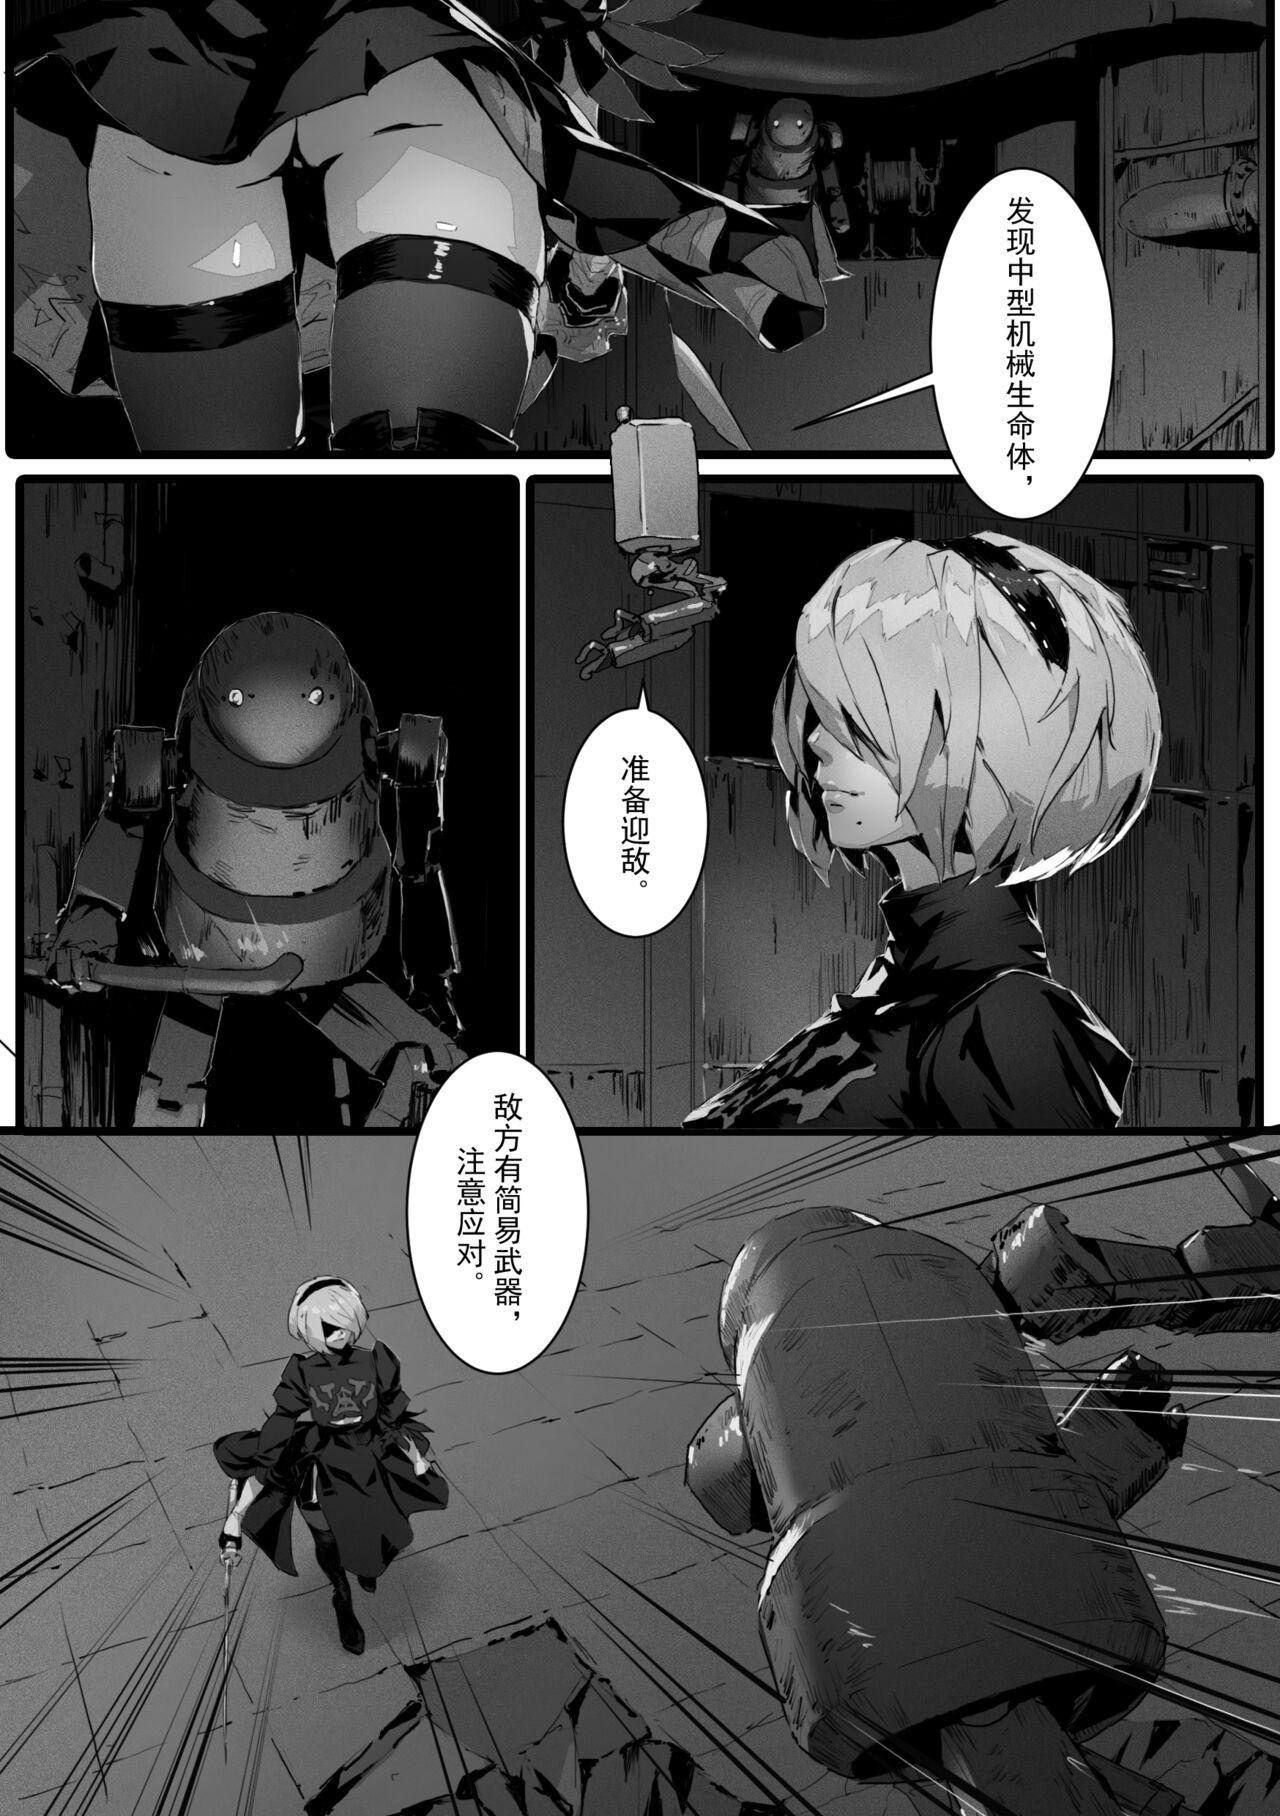  2B In Trouble Part 1-6 - Nier automata Real Amature Porn - Picture 2